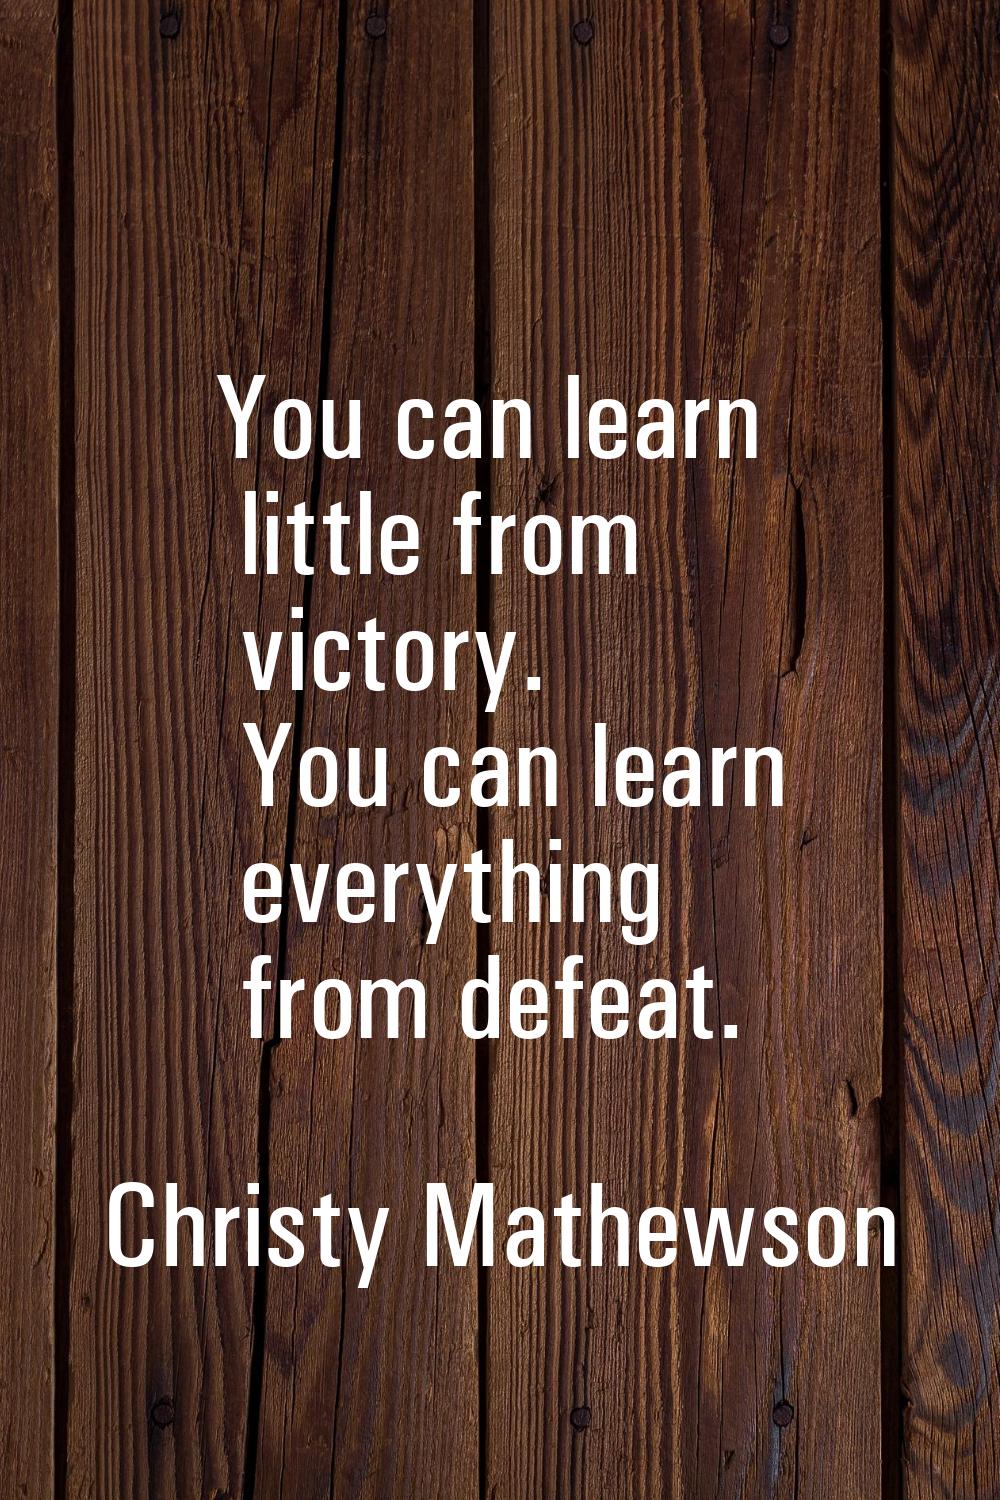 You can learn little from victory. You can learn everything from defeat.